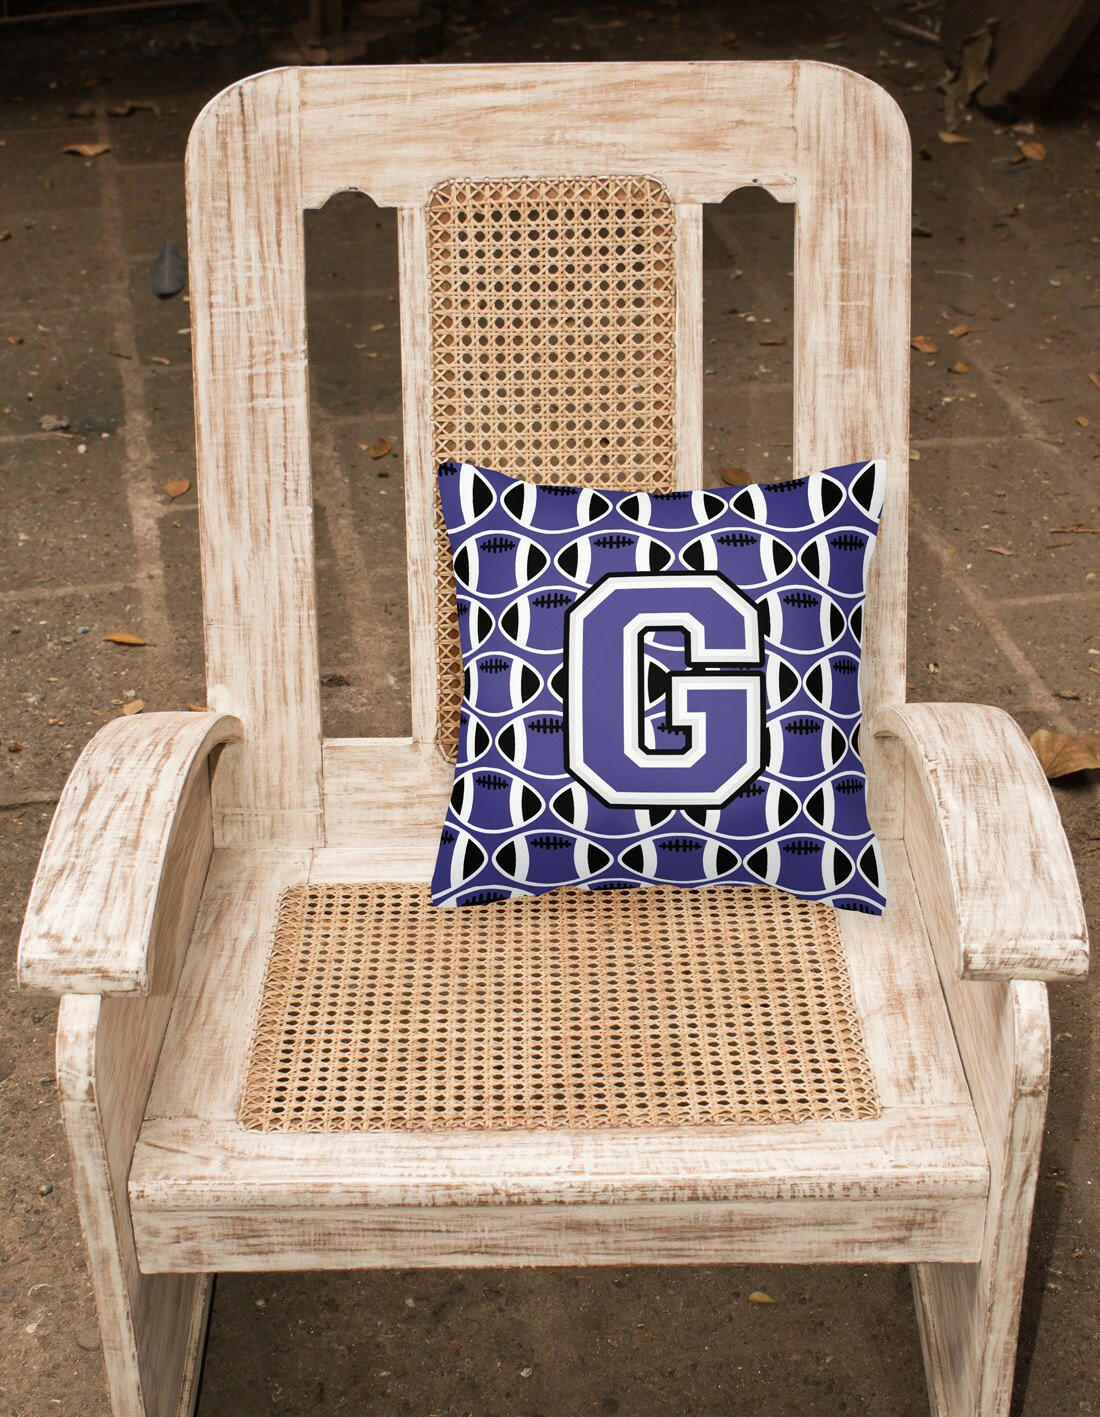 Letter G Football Purple and White Fabric Decorative Pillow CJ1068-GPW1414 by Caroline's Treasures